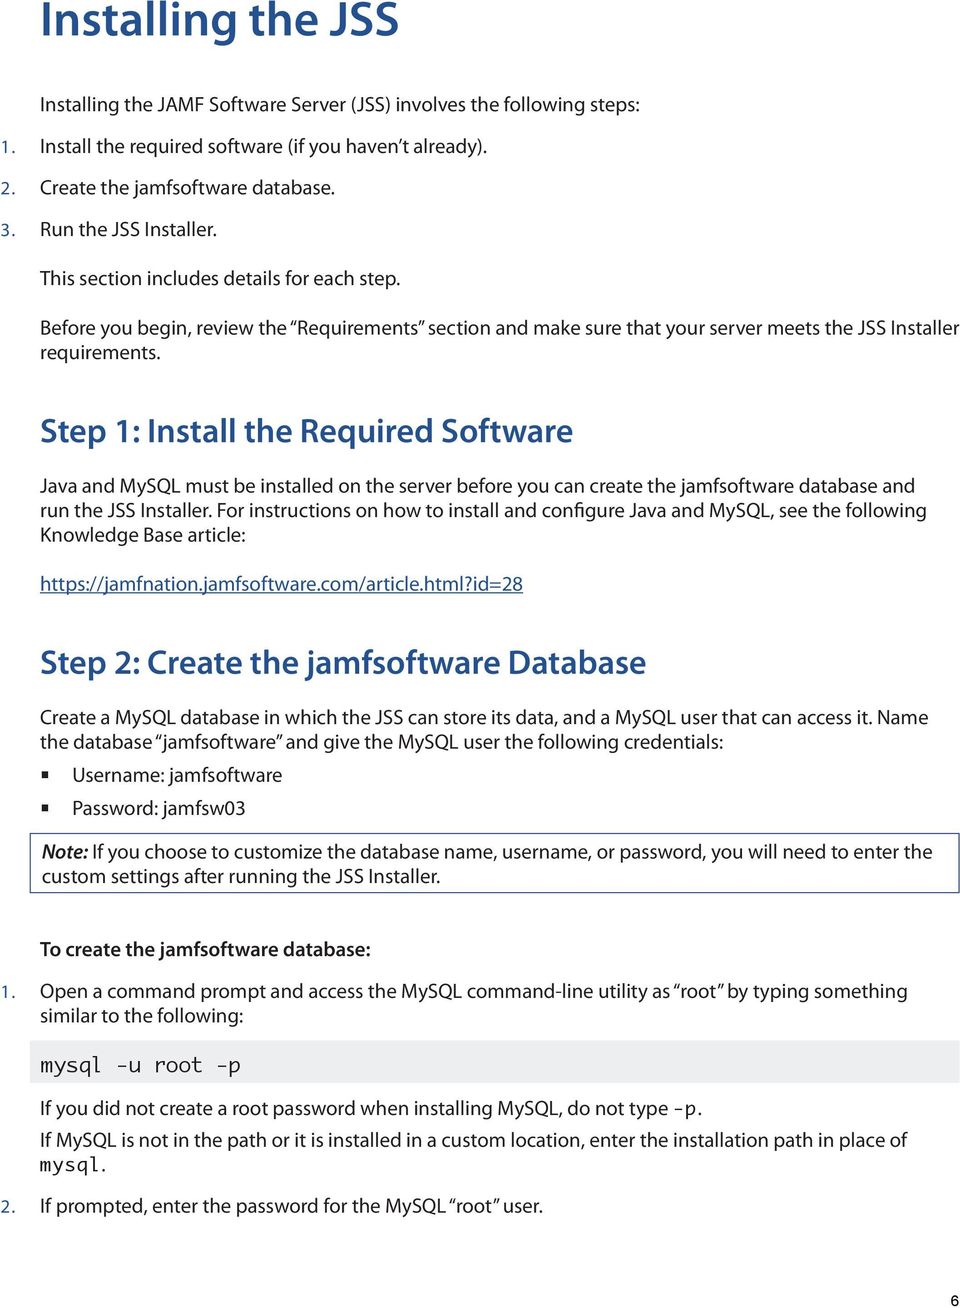 Step 1: Install the Required Software Java and MySQL must be installed on the server before you can create the jamfsoftware database and run the JSS Installer.